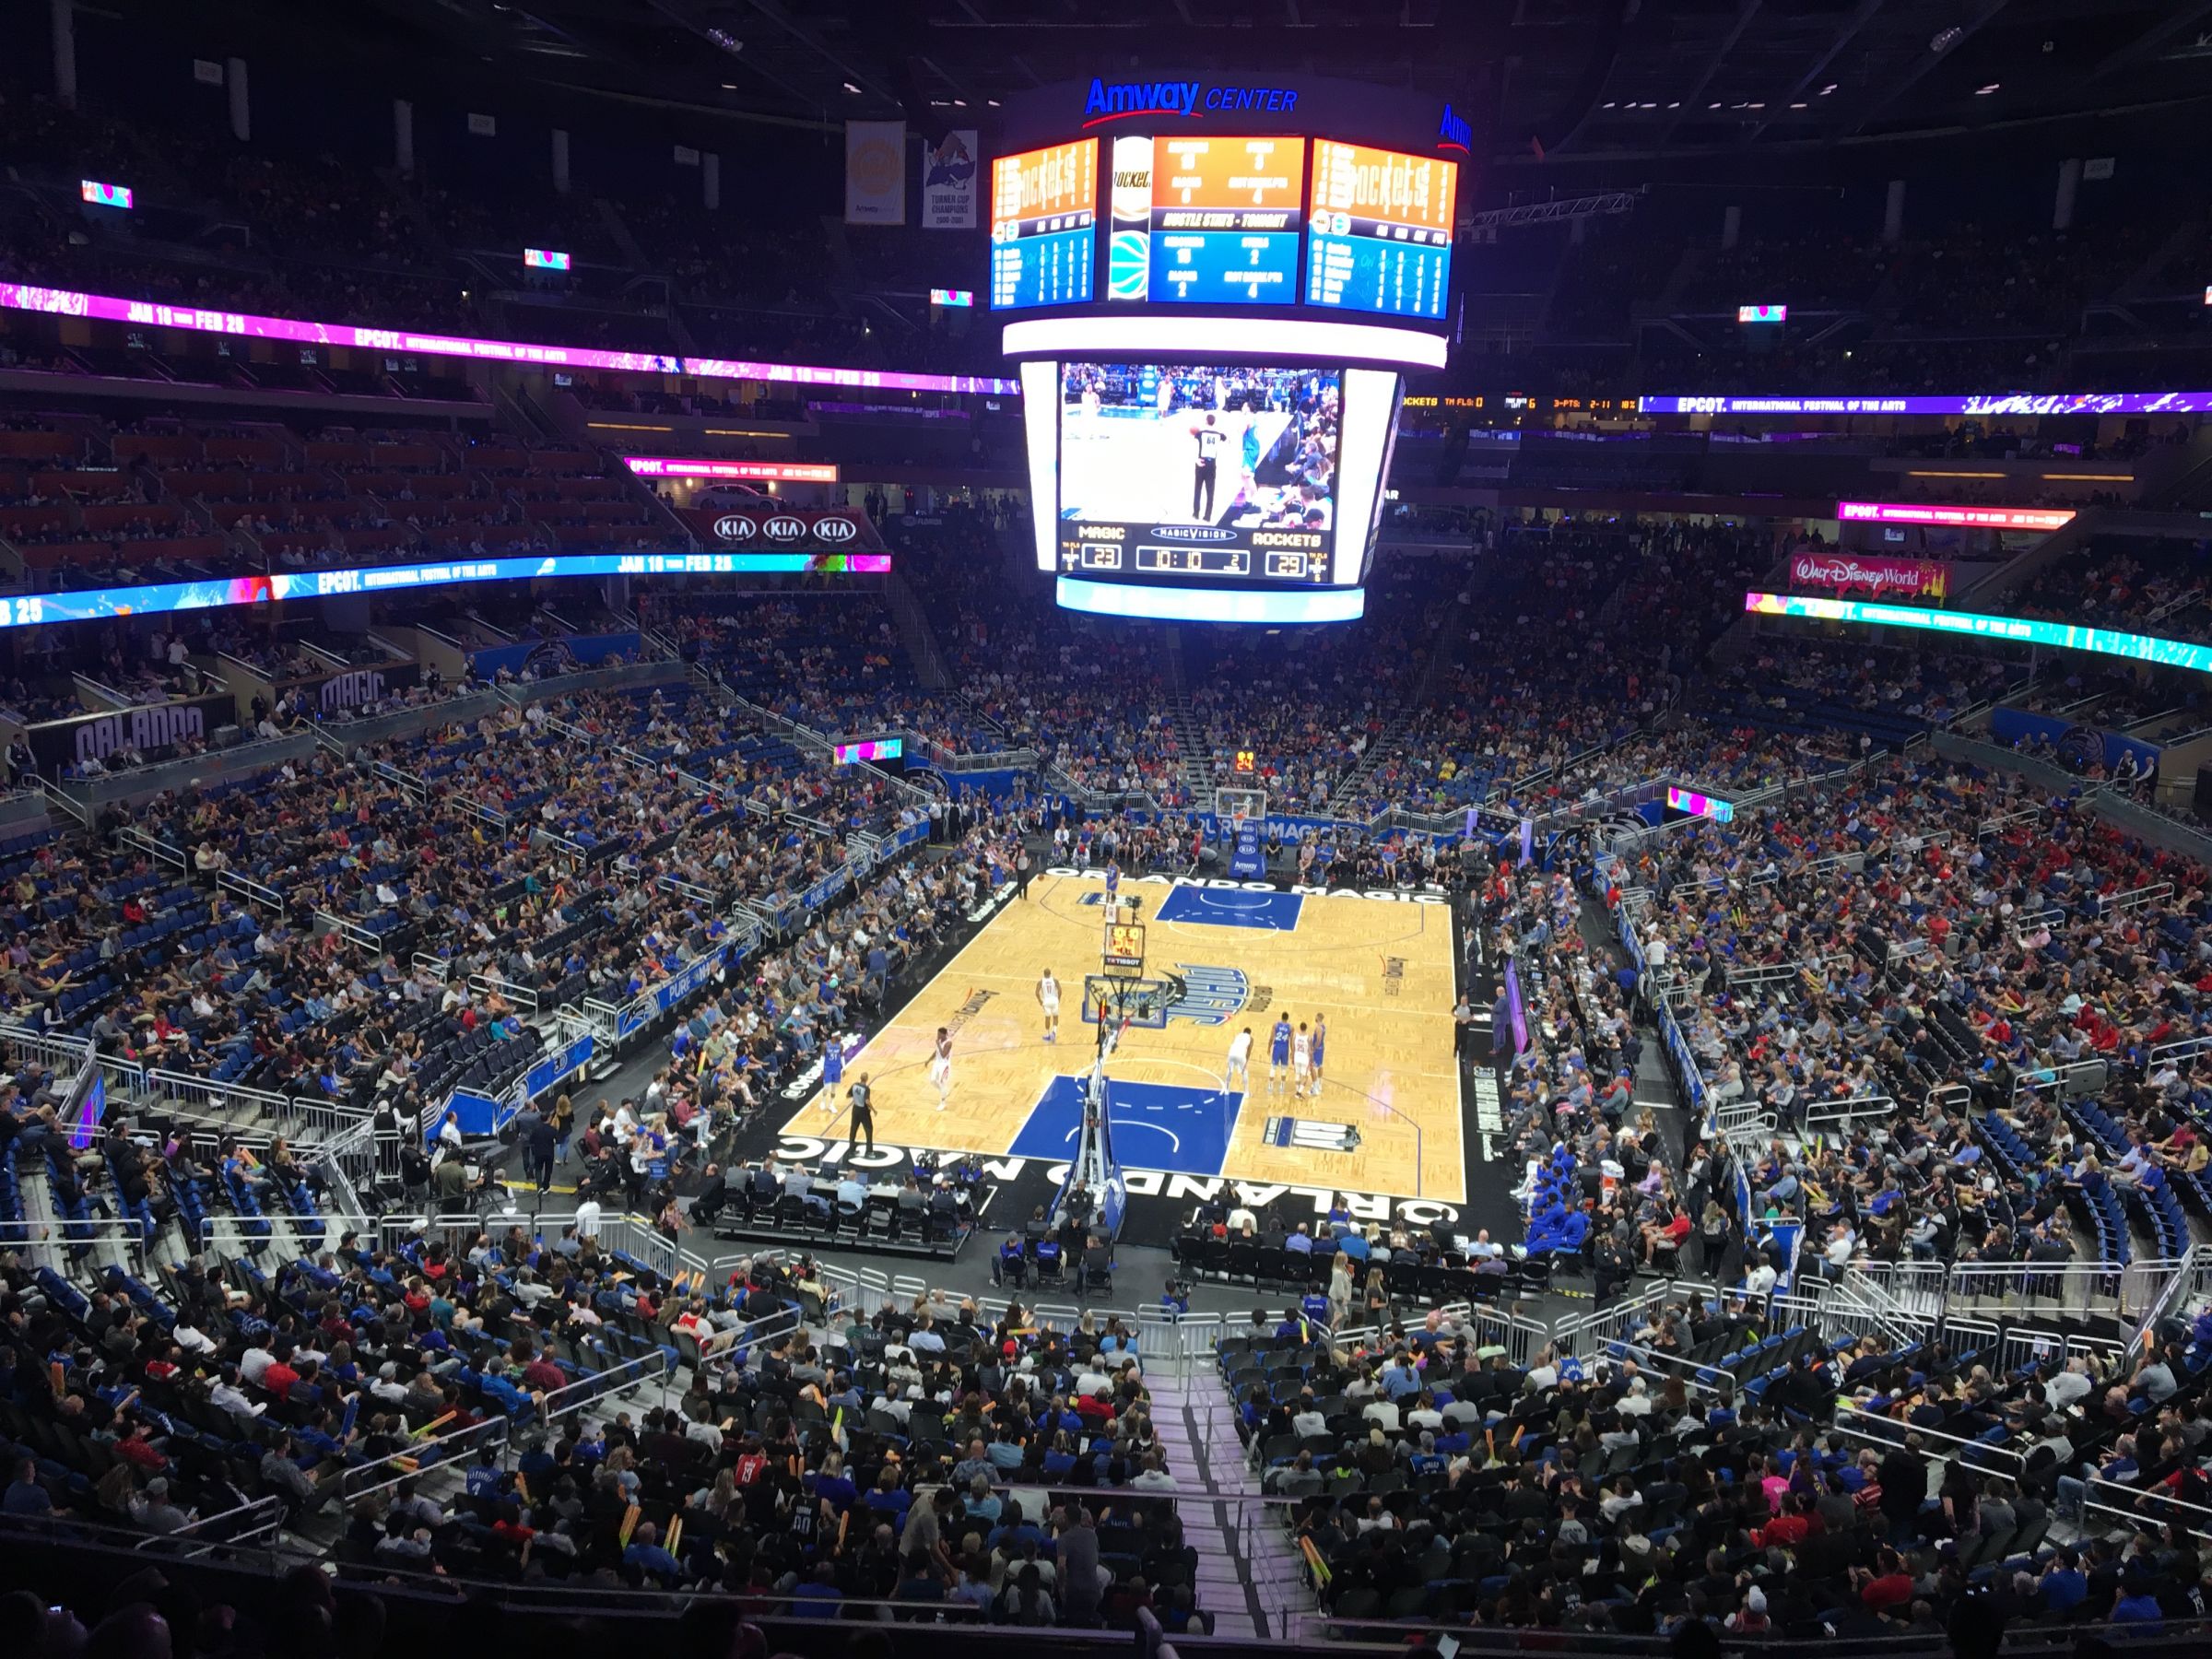 section 110a, row 29 seat view  for basketball - amway center